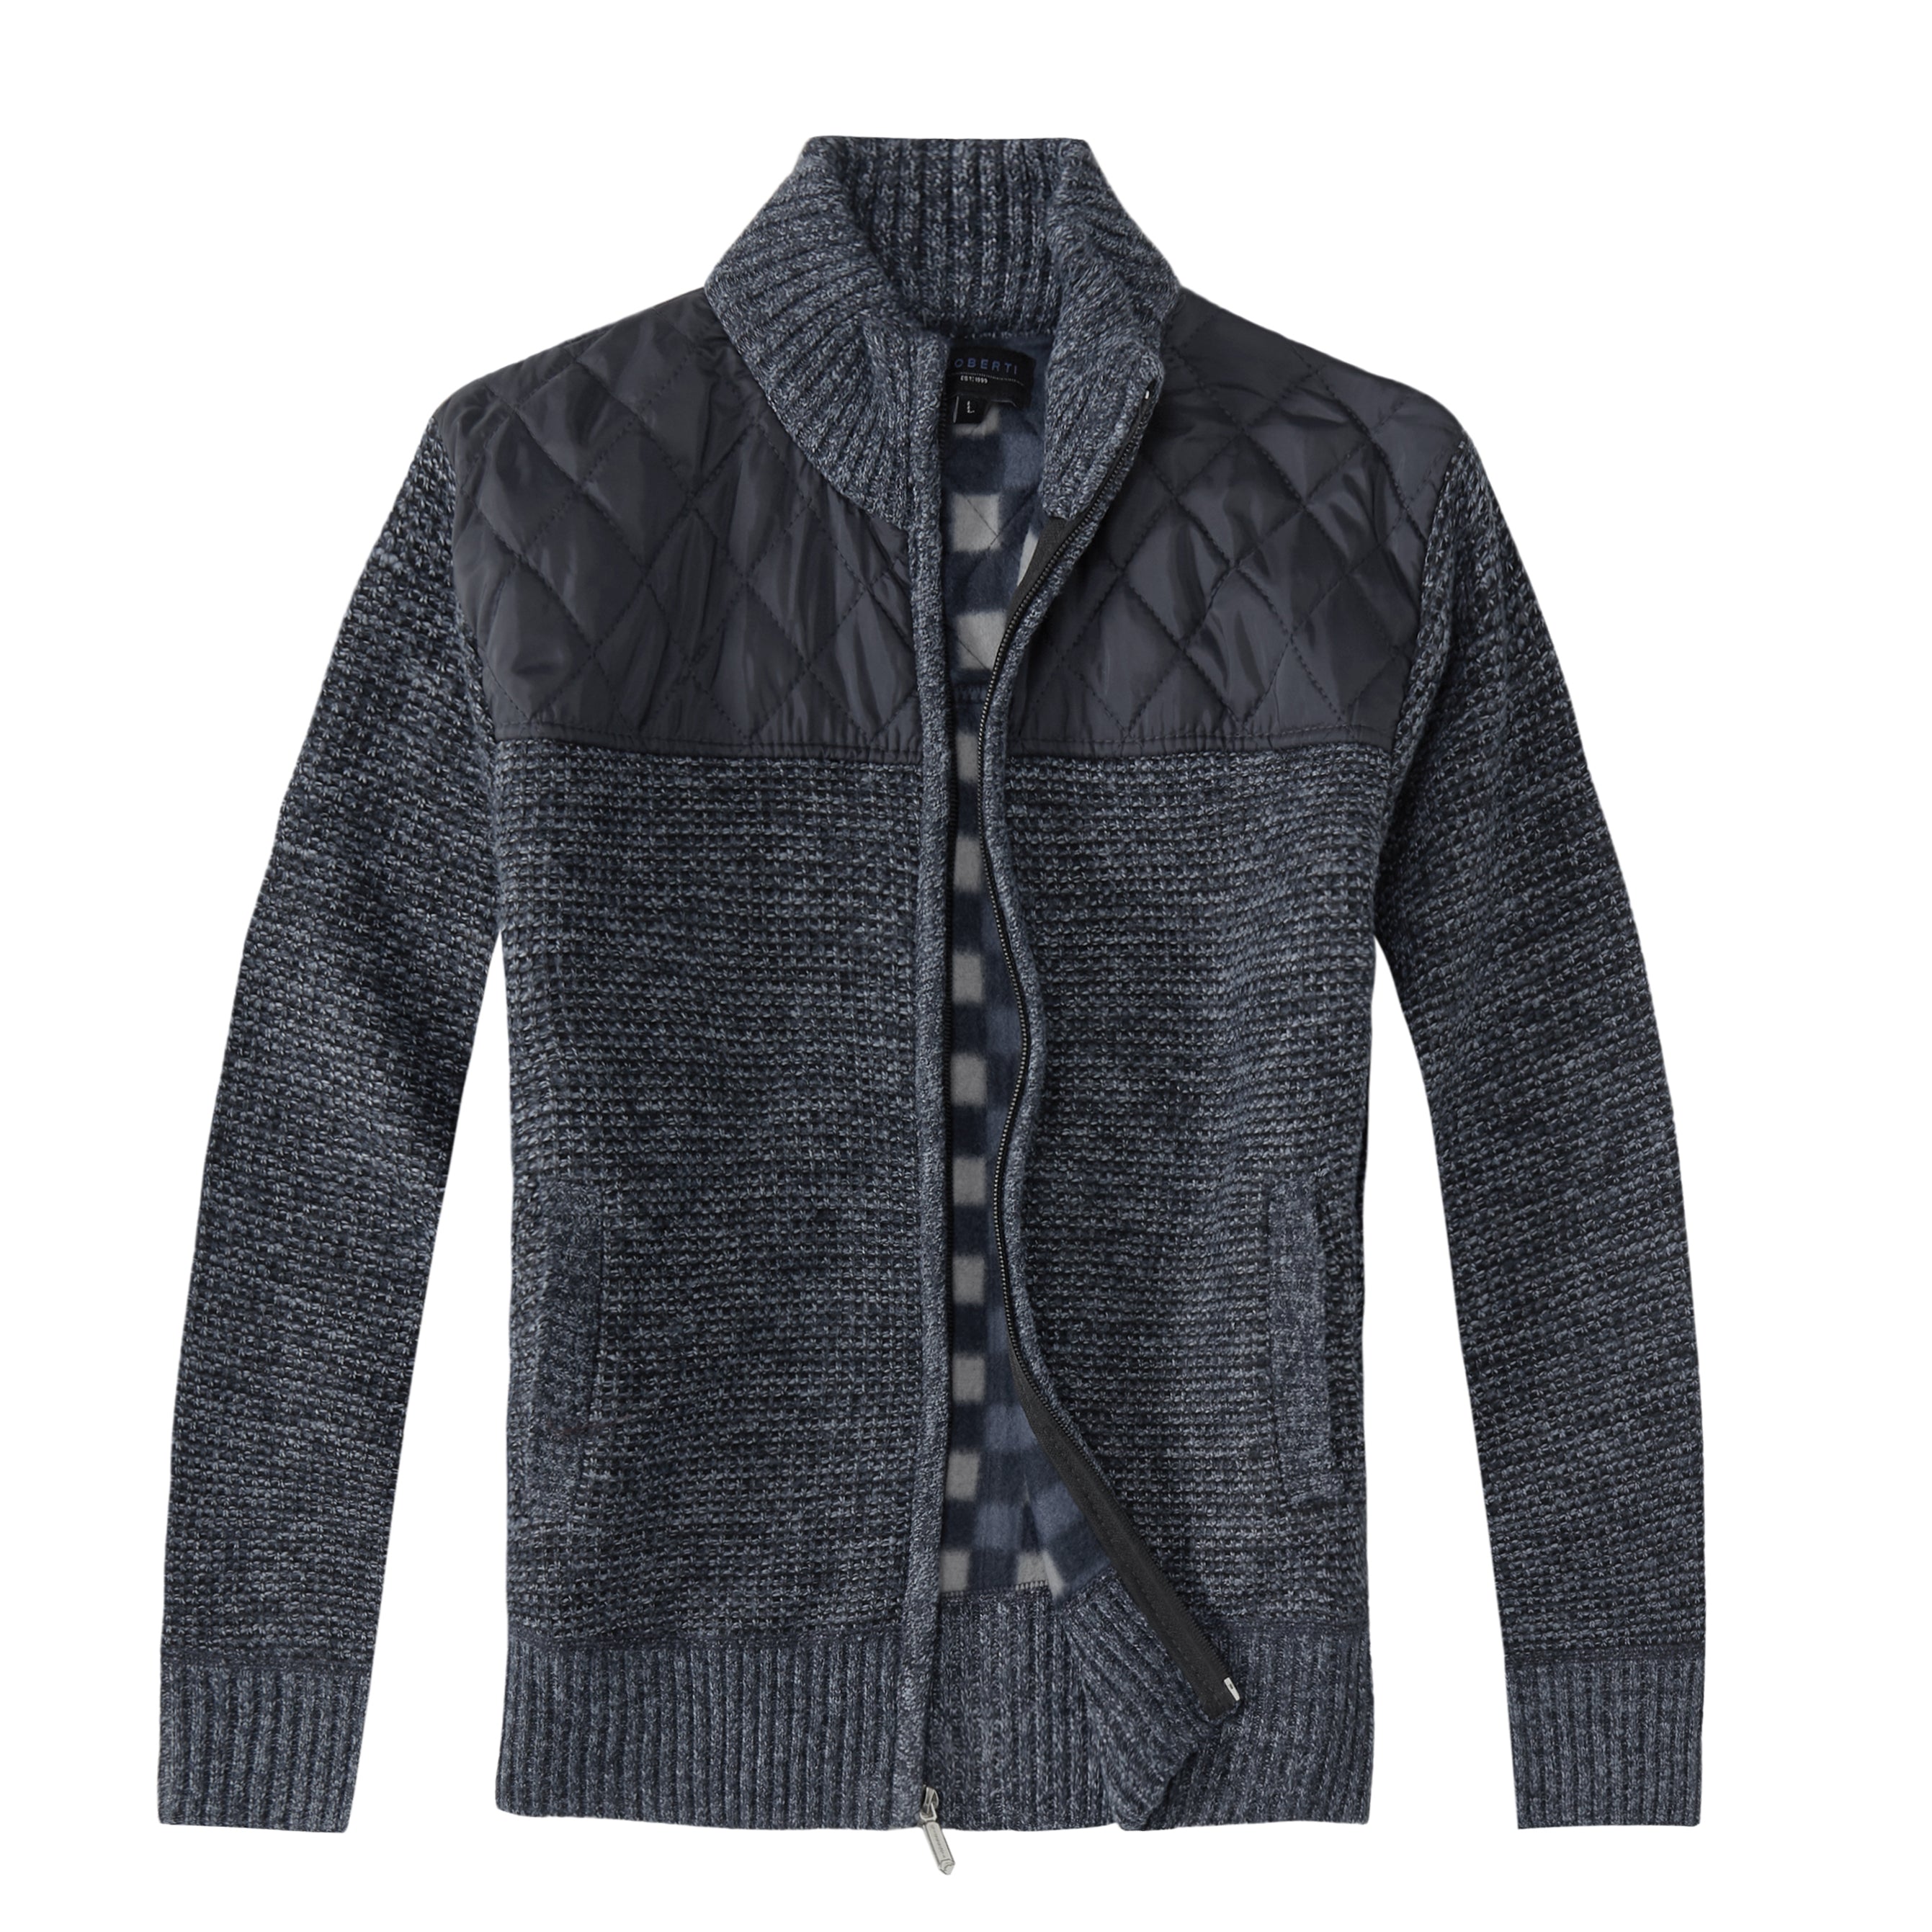 title:Gioberti Men's Marled Blue Knitted Regular Fit Full Zip Cardigan Sweater with Soft Brushed Flannel Lining;color:Marled Blue